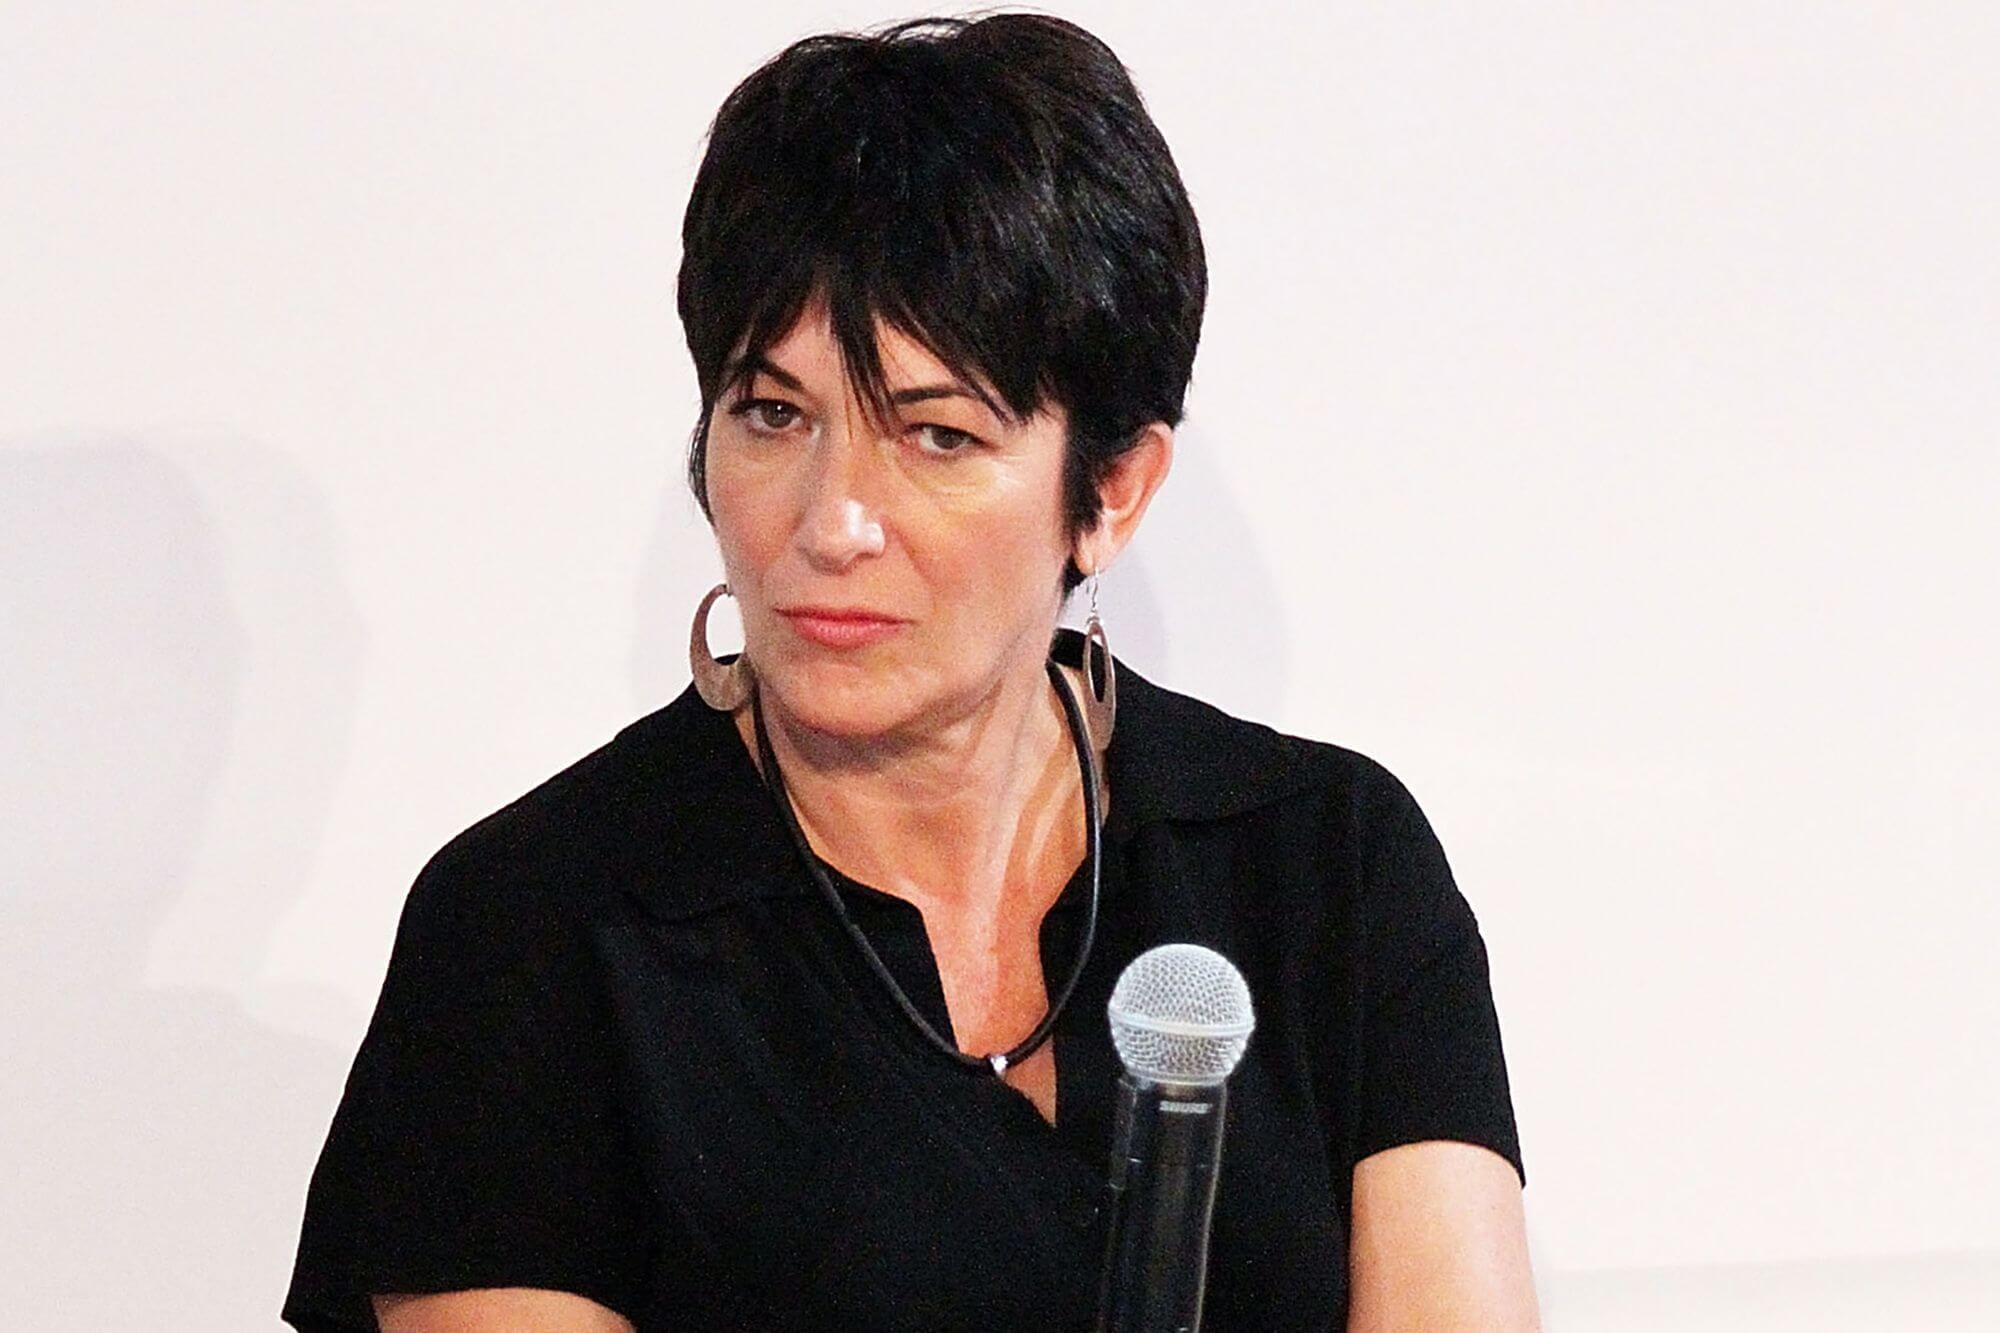 You Can Bet on Who Will Be Named First by Ghislaine Maxwell in Federal Epstein Case - See Full Odds